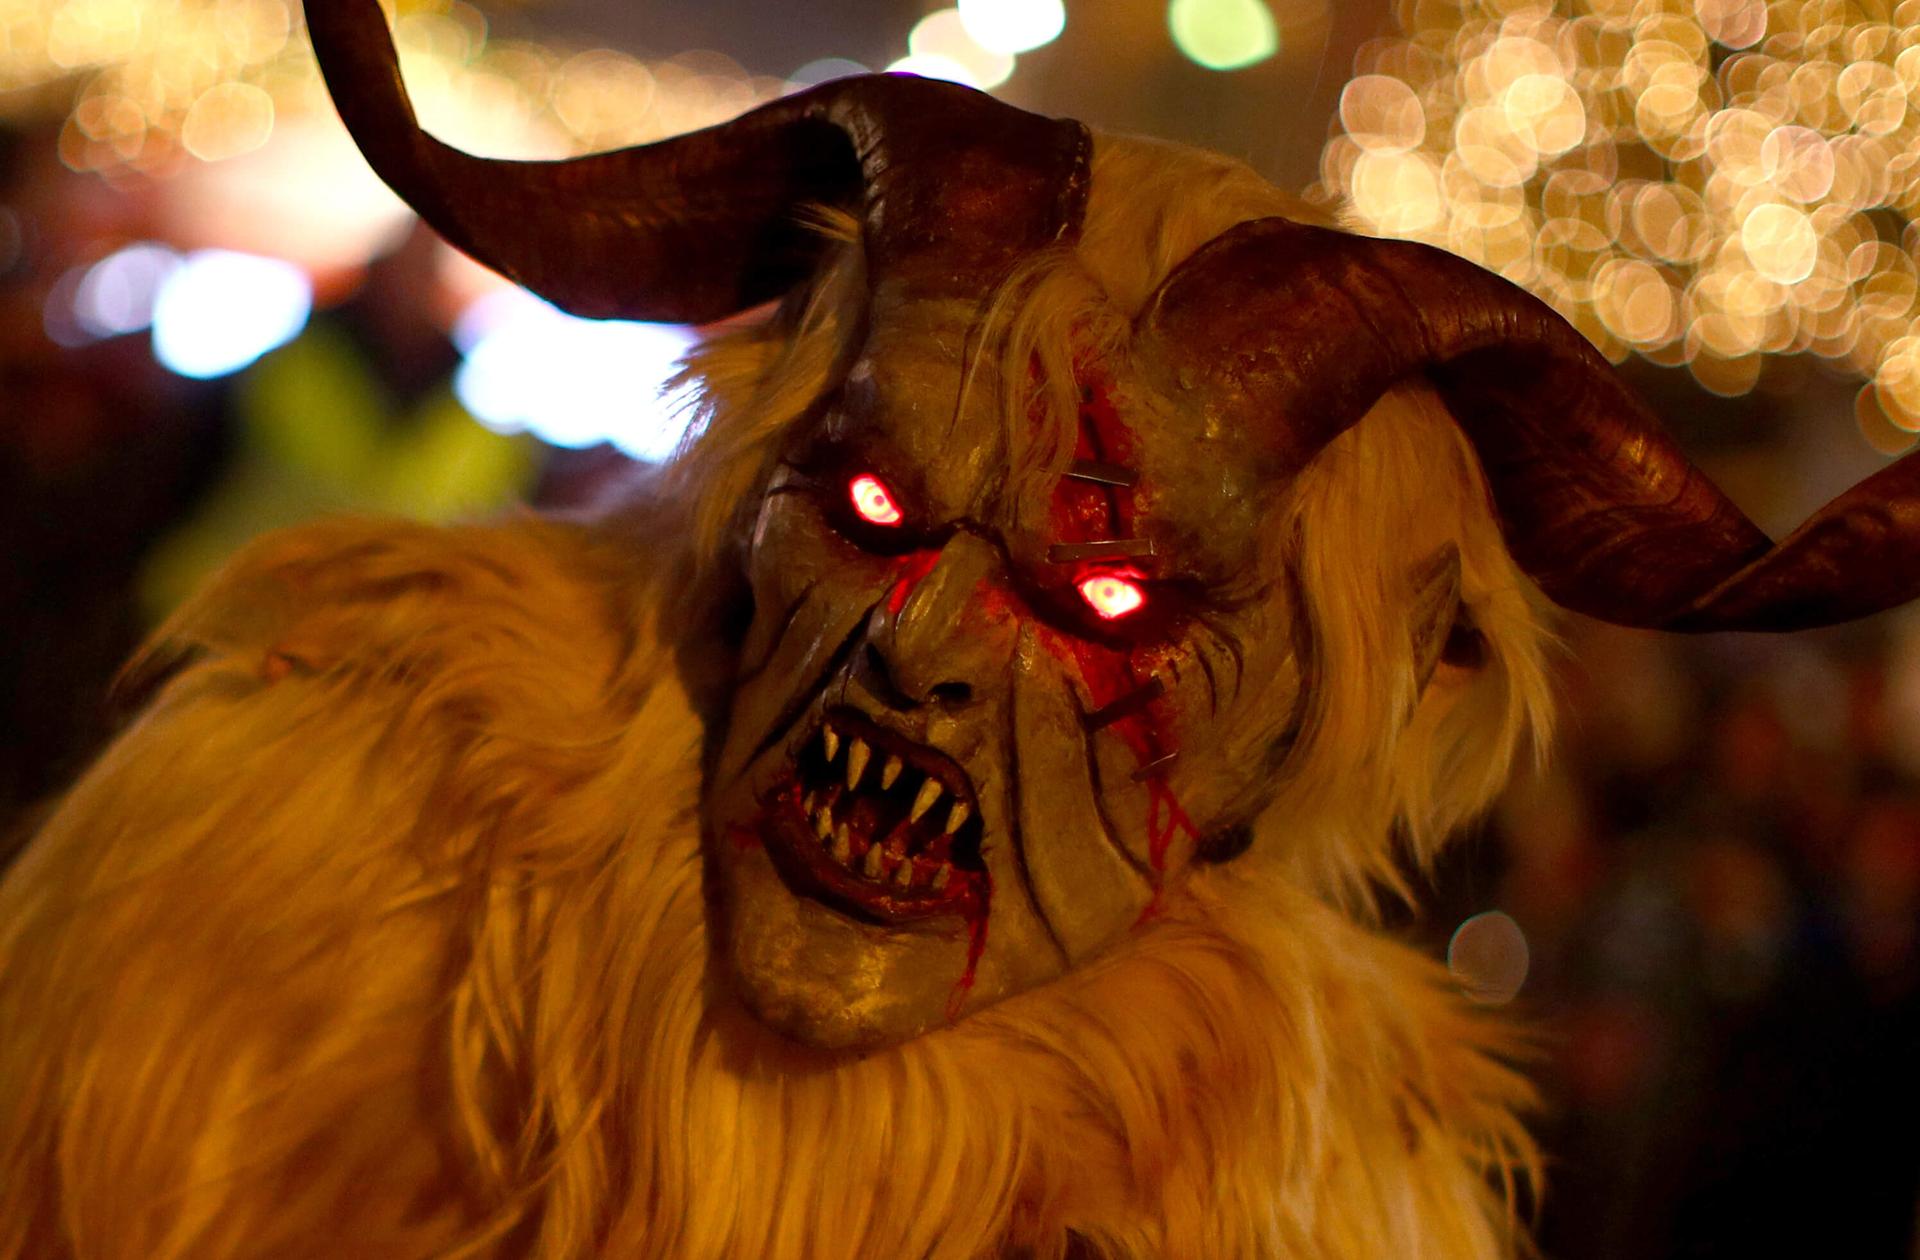 a closeup of a Krampus mask with glowing eyes